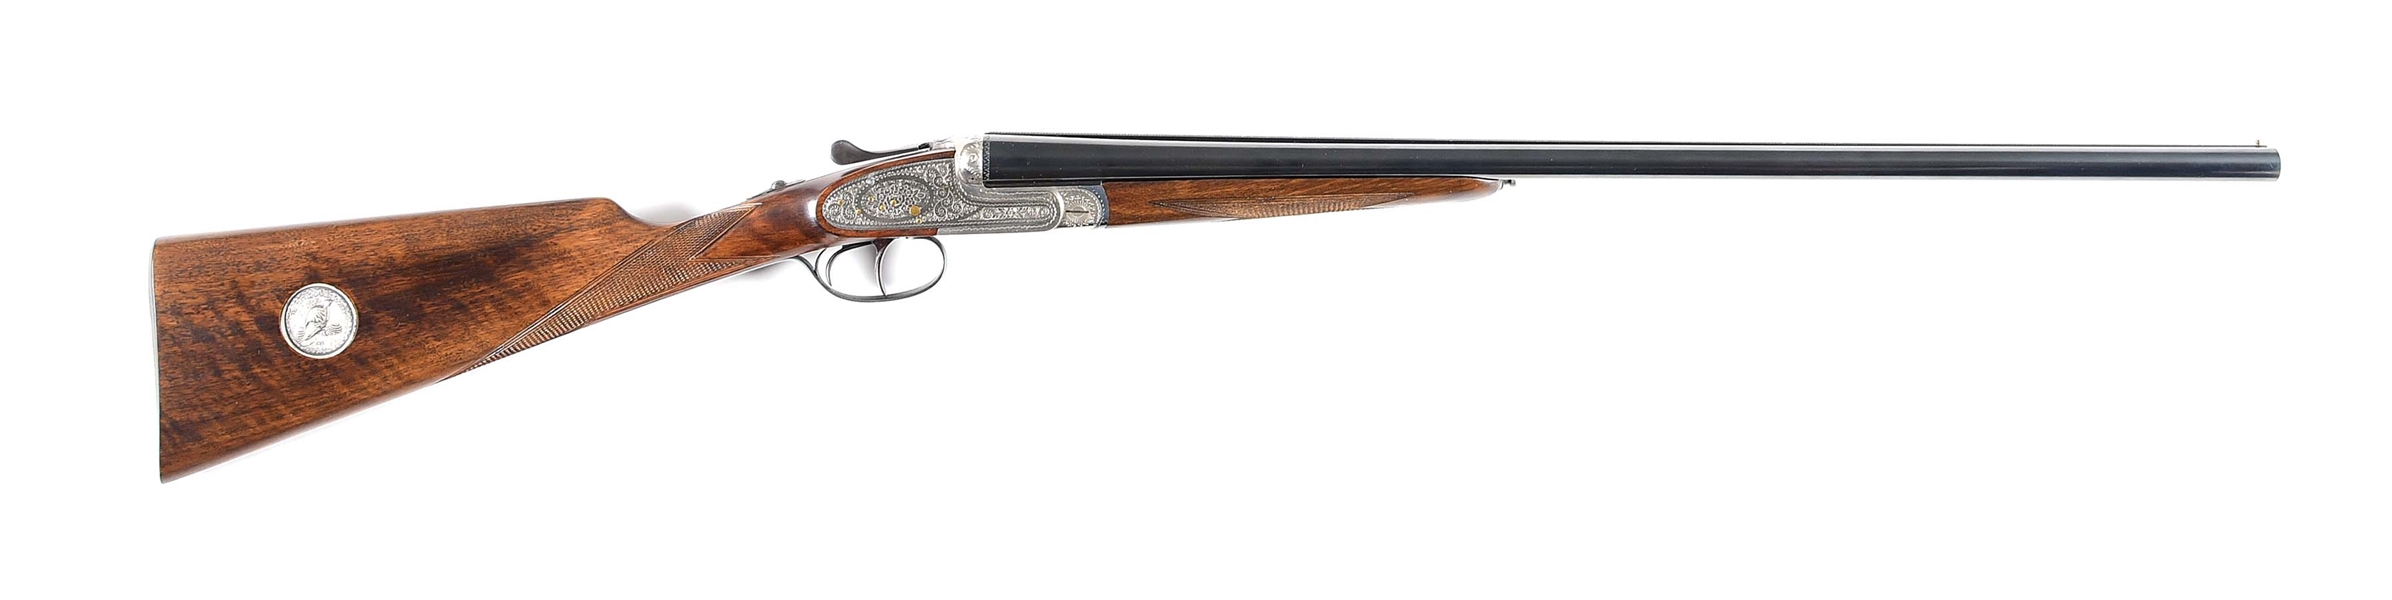 (M) UGARTECHEA RUFFLED GROUSE SOCIETY 208A SIDELOCK 20 GAUGE SIDE BY SIDE SHOTGUN WITH ORIGINAL BOX, PAPERWORK.